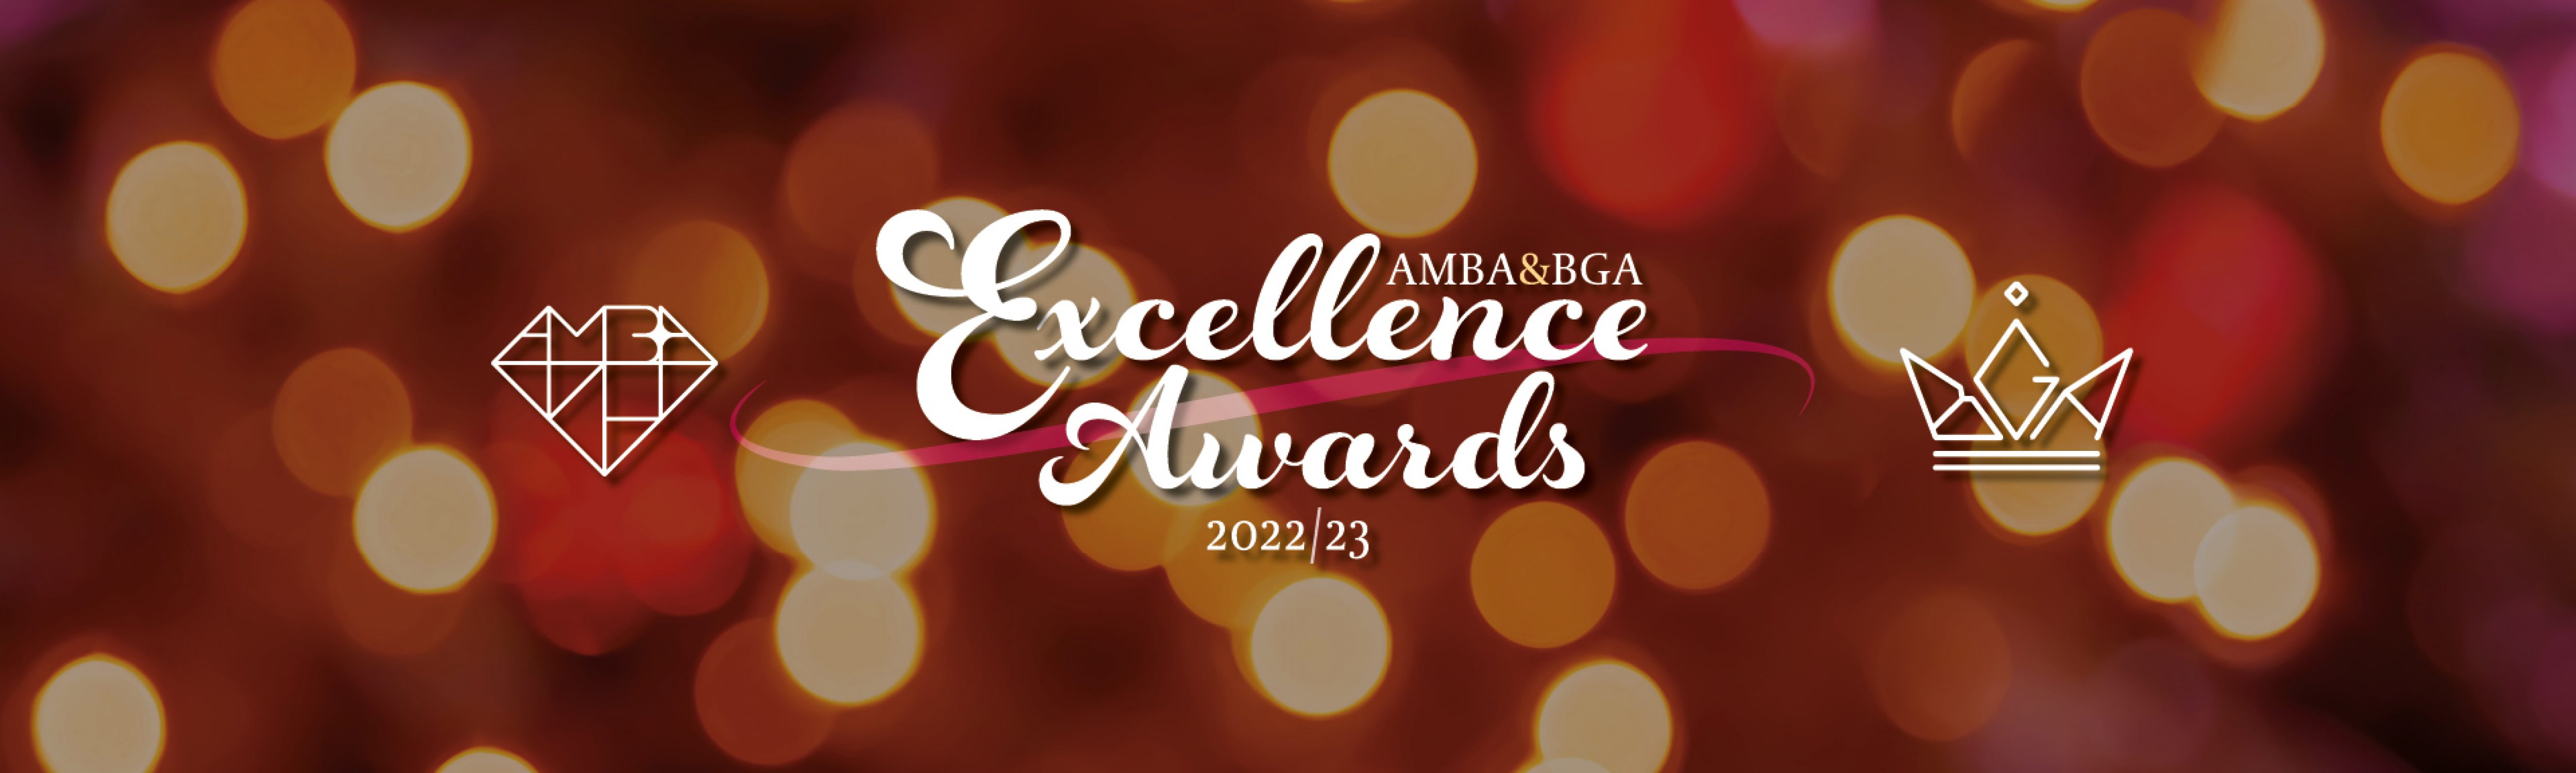 Excellence Awards 2022